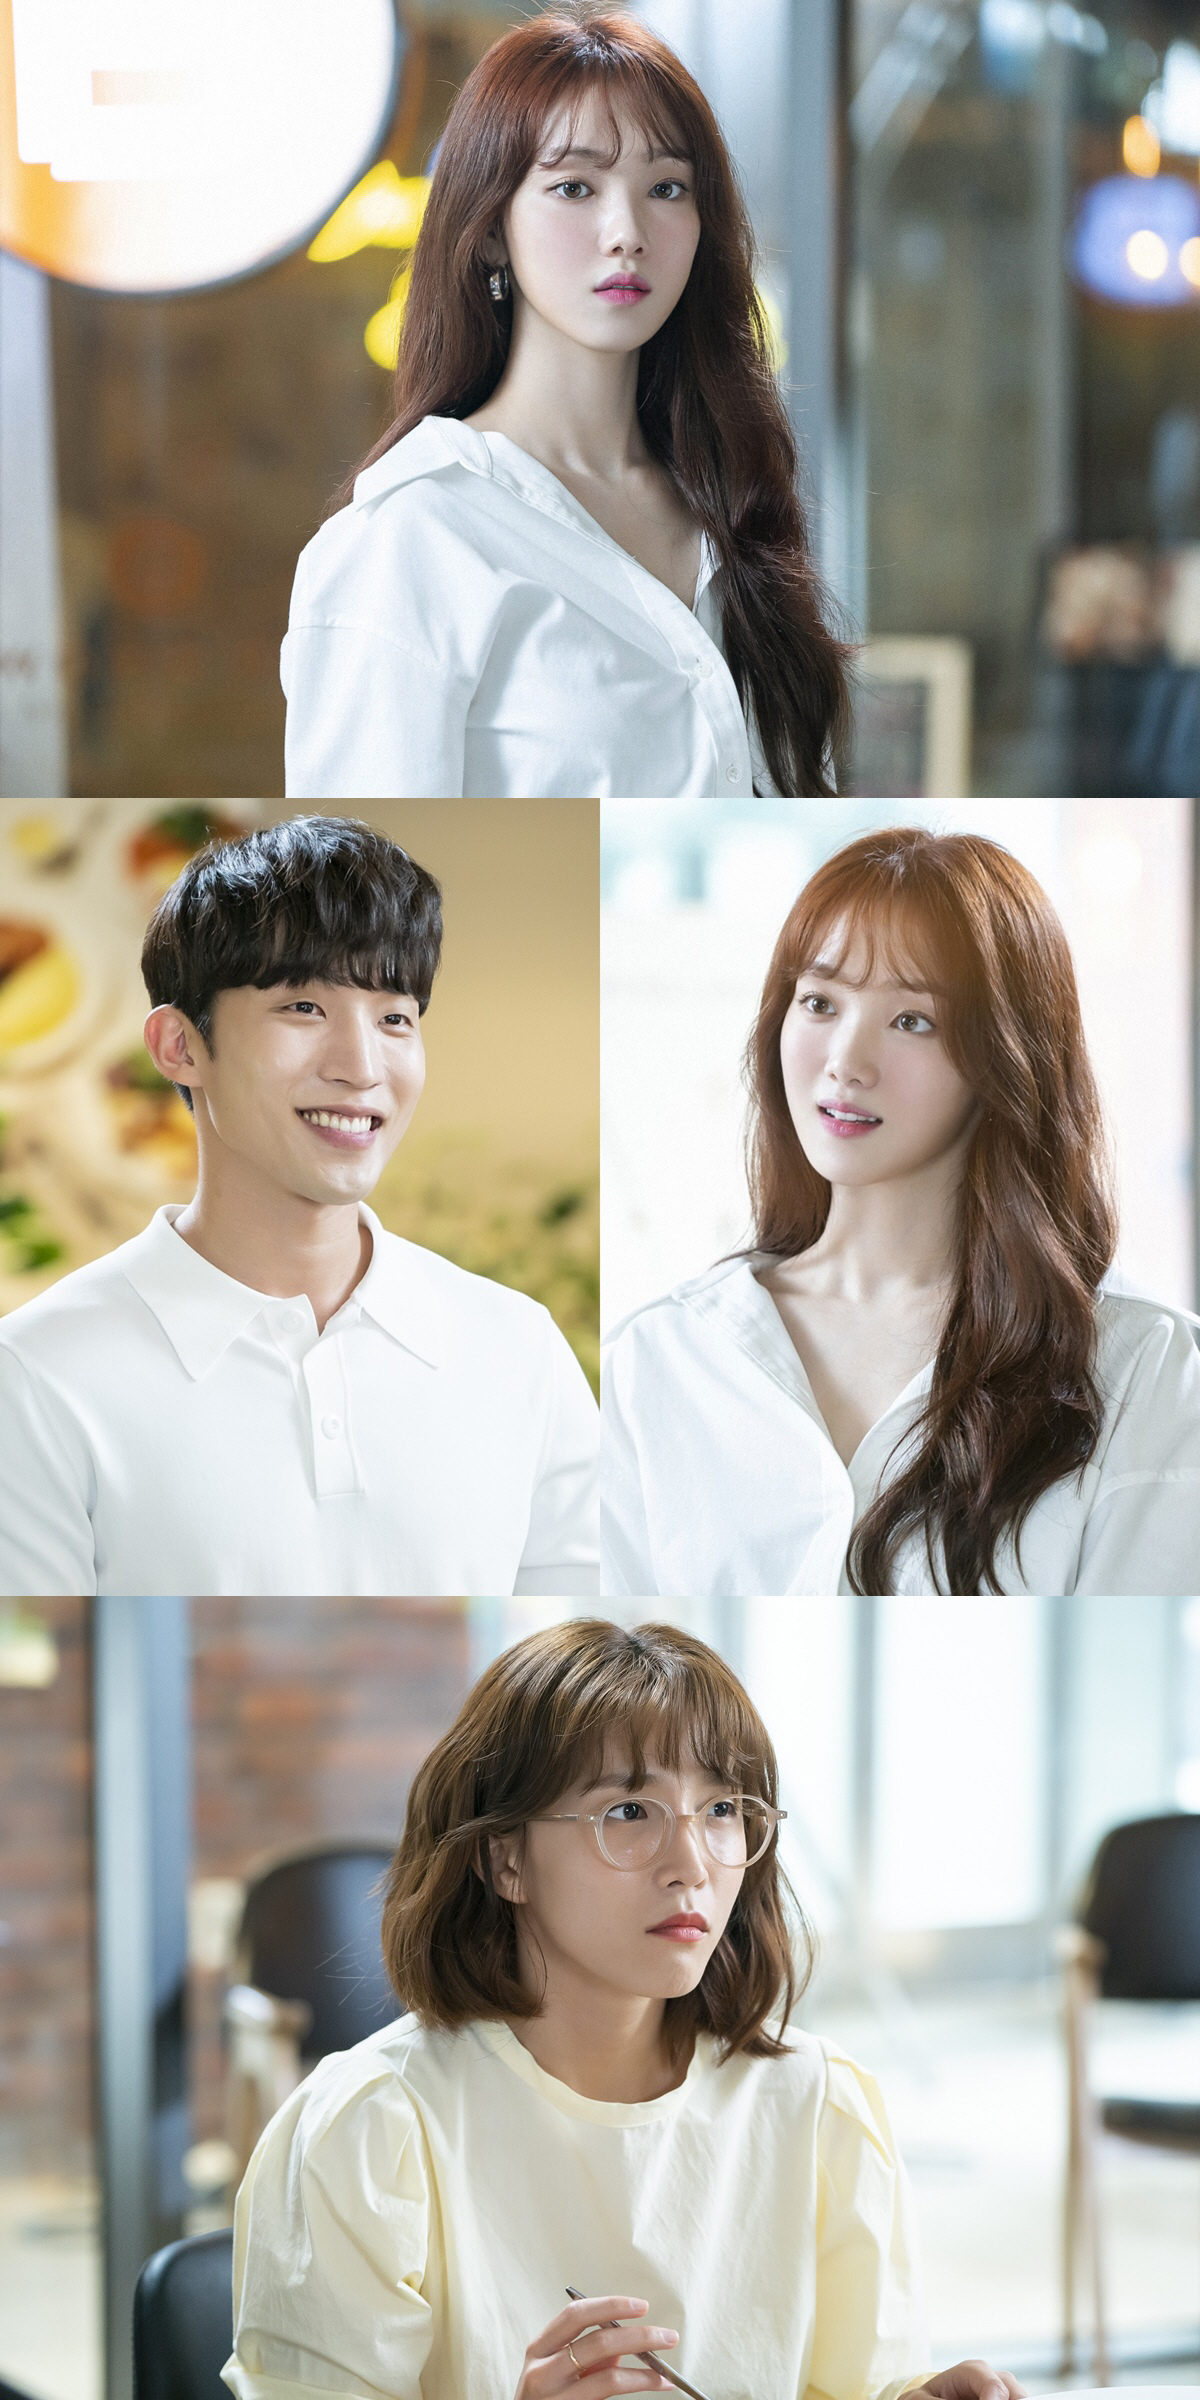 Actor Lee Sung-kyung appears on SEK in Ive Goed Once.KBS 2TV weekend Drama Ive been to once (playplayplay by Yang Hee-seung, Ange, Director Lee Jae-sang, Production Studio Dragon, Bon Factory) is drawing favorable reviews by catching up with two rabbits with topicality and ratings.In particular, it ranks second in the topic of the TV drama in the third week of June (based on the Good Data Corporation topic index), proving the hot response of viewers.In the 53rd and 54th episodes broadcast today (27th), Lee Cho-hee (played by Song Da-hee), Lee Sang Yi (played by Park Jae-seok) and Lee Sung-kyung (played by Ji Sun-kyung) are drawn and added to the excitement.Lee Sung-kyung is going to make SEK appearance with hot model Ji Sun Kyung and make the drama richer.In the public photos, Ji Seon-kyung (Lee Sung-kyung), who is making a surprised look, is caught and attracts attention.She was surprised by the sudden encounter, and she was interested in talking to Park Jae-seok (Lee Sang Yi).In her smile, she can get a glimpse of her relaxation, and I wonder what kind of story she would have had between the two.In the meantime, Song Dae-hees expression, which is solidifying his expression alone in a cheerful atmosphere, amplifies curiosity.Song Dae-hee, who was always smiling brightly, suddenly hardened his face after seeing a friendly Park Jae-seok and Ji Seon-kyung, and it makes him feel that the situation that came to them is not unusual.Especially after meeting with Ji Seon-kyung on this day, the couple will have their first fight.Indeed, there is more expectation in this broadcast about what kind of relationship Ji Seon-kyung and Park Jae-seok will have, and what stories have come between them.I went to see you once, the production team said, I am grateful to Lee Sung-kyung Actor who responded to the short appearance with Yang Hee-seungs relationship and enthusiastically filmed it. It was a fun and pleasant shooting.Expect the short but intense Lee Sung-kyung, Lee Cho-hee and Lee Sang Yis chemistry. On the other hand, Lee Cho-hee, Lee Sang Yi, and Lee Sung-kyungs immediate date scene can be found at 53 and 54 times of I went once which is broadcasted at 7:55 pm today (27th).